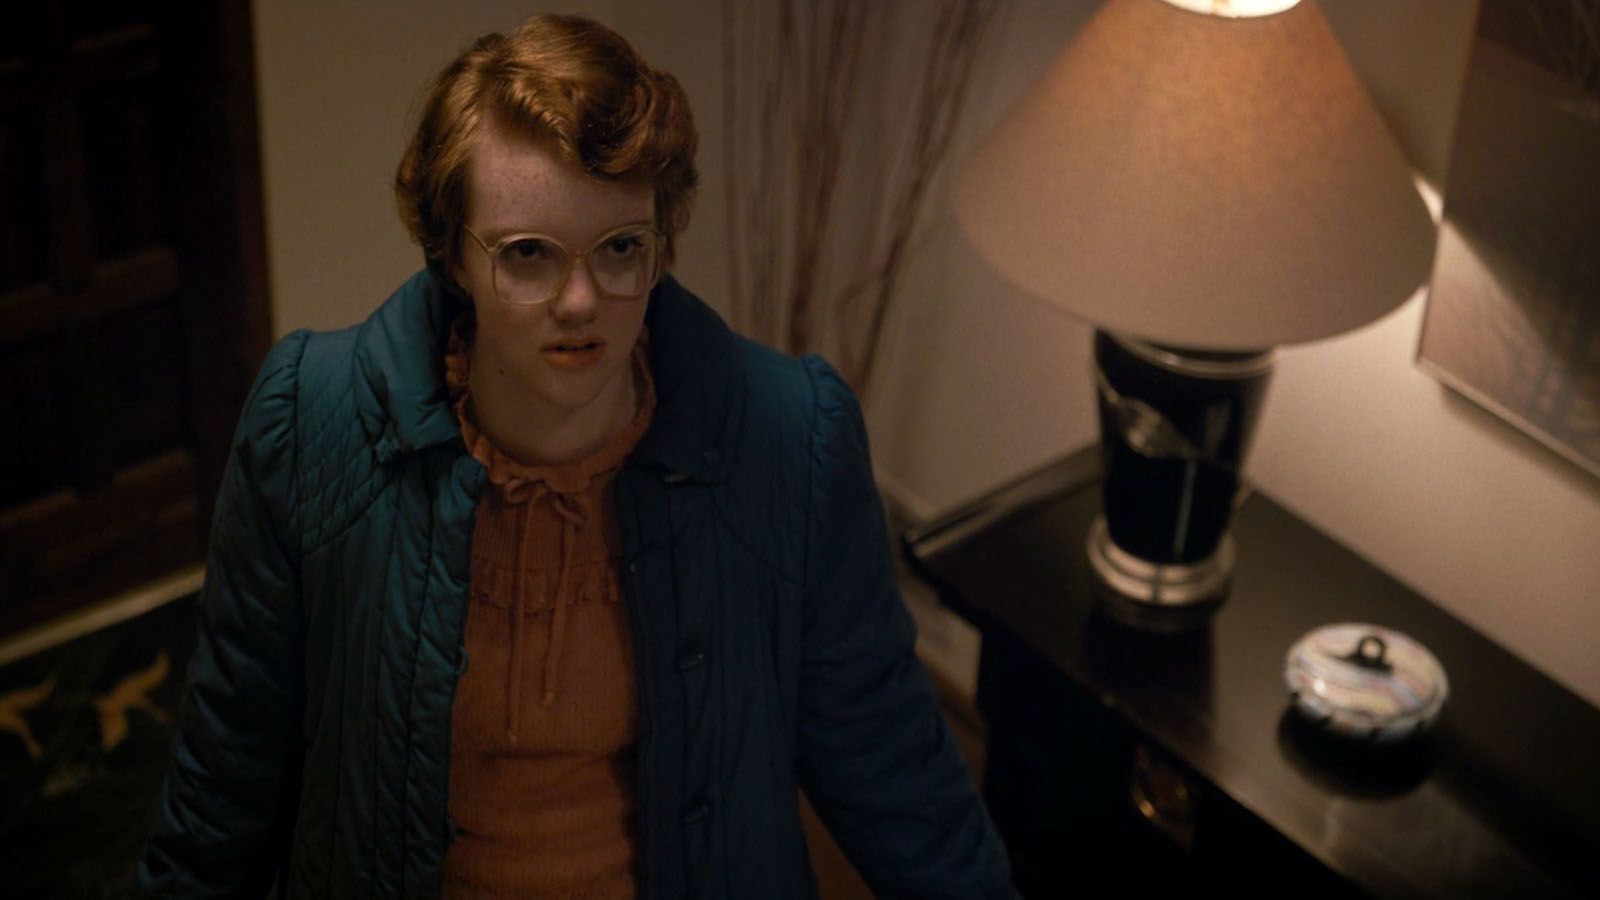 Stranger Things WILL give us Justice for Barb in season 2